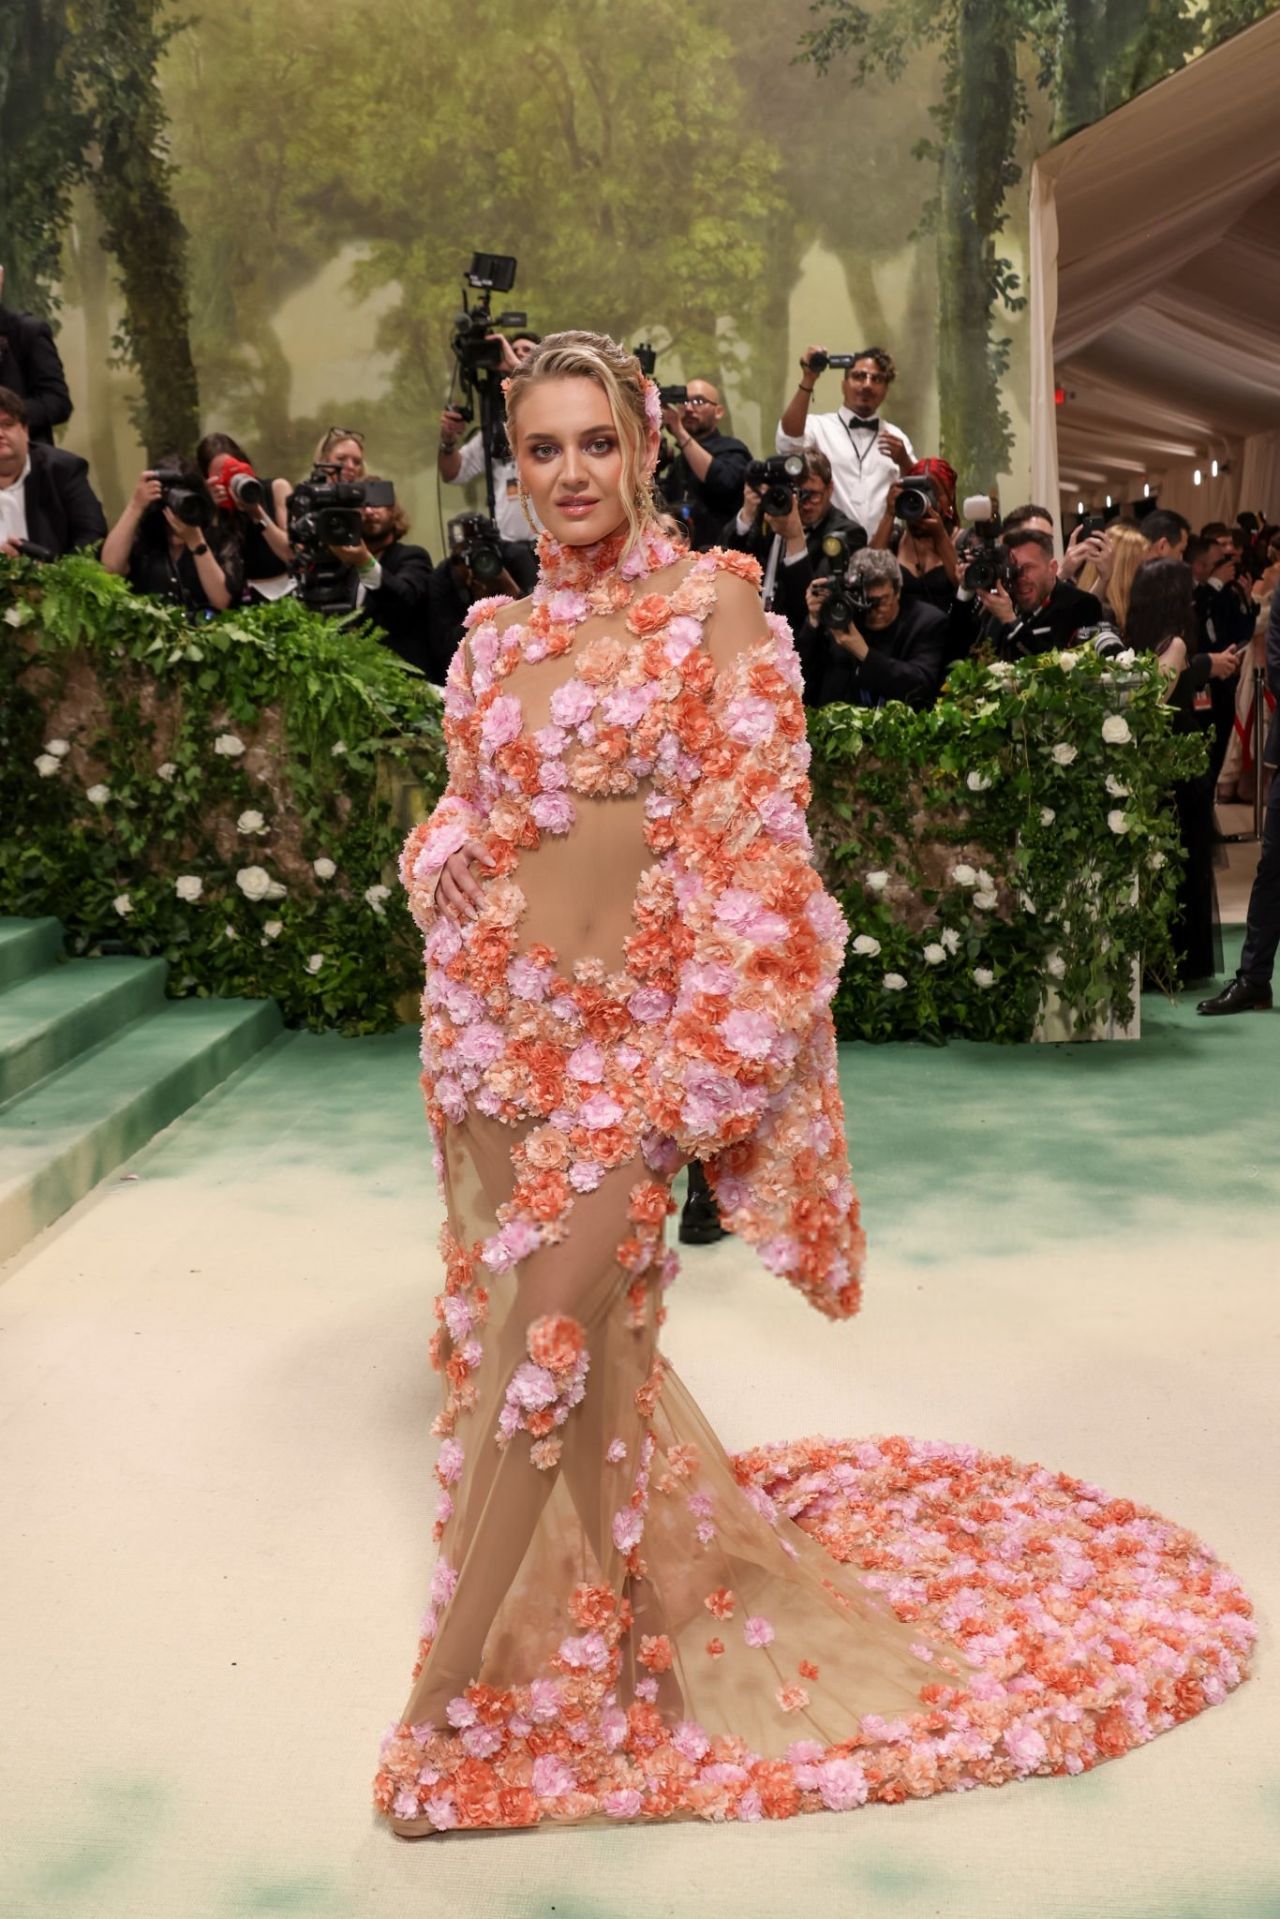 KELSEA BALLERINI AND CHASE STOKES MAKE A STUNNING DEBUT AT THE 2024 MET GALA IN NEW YORK14